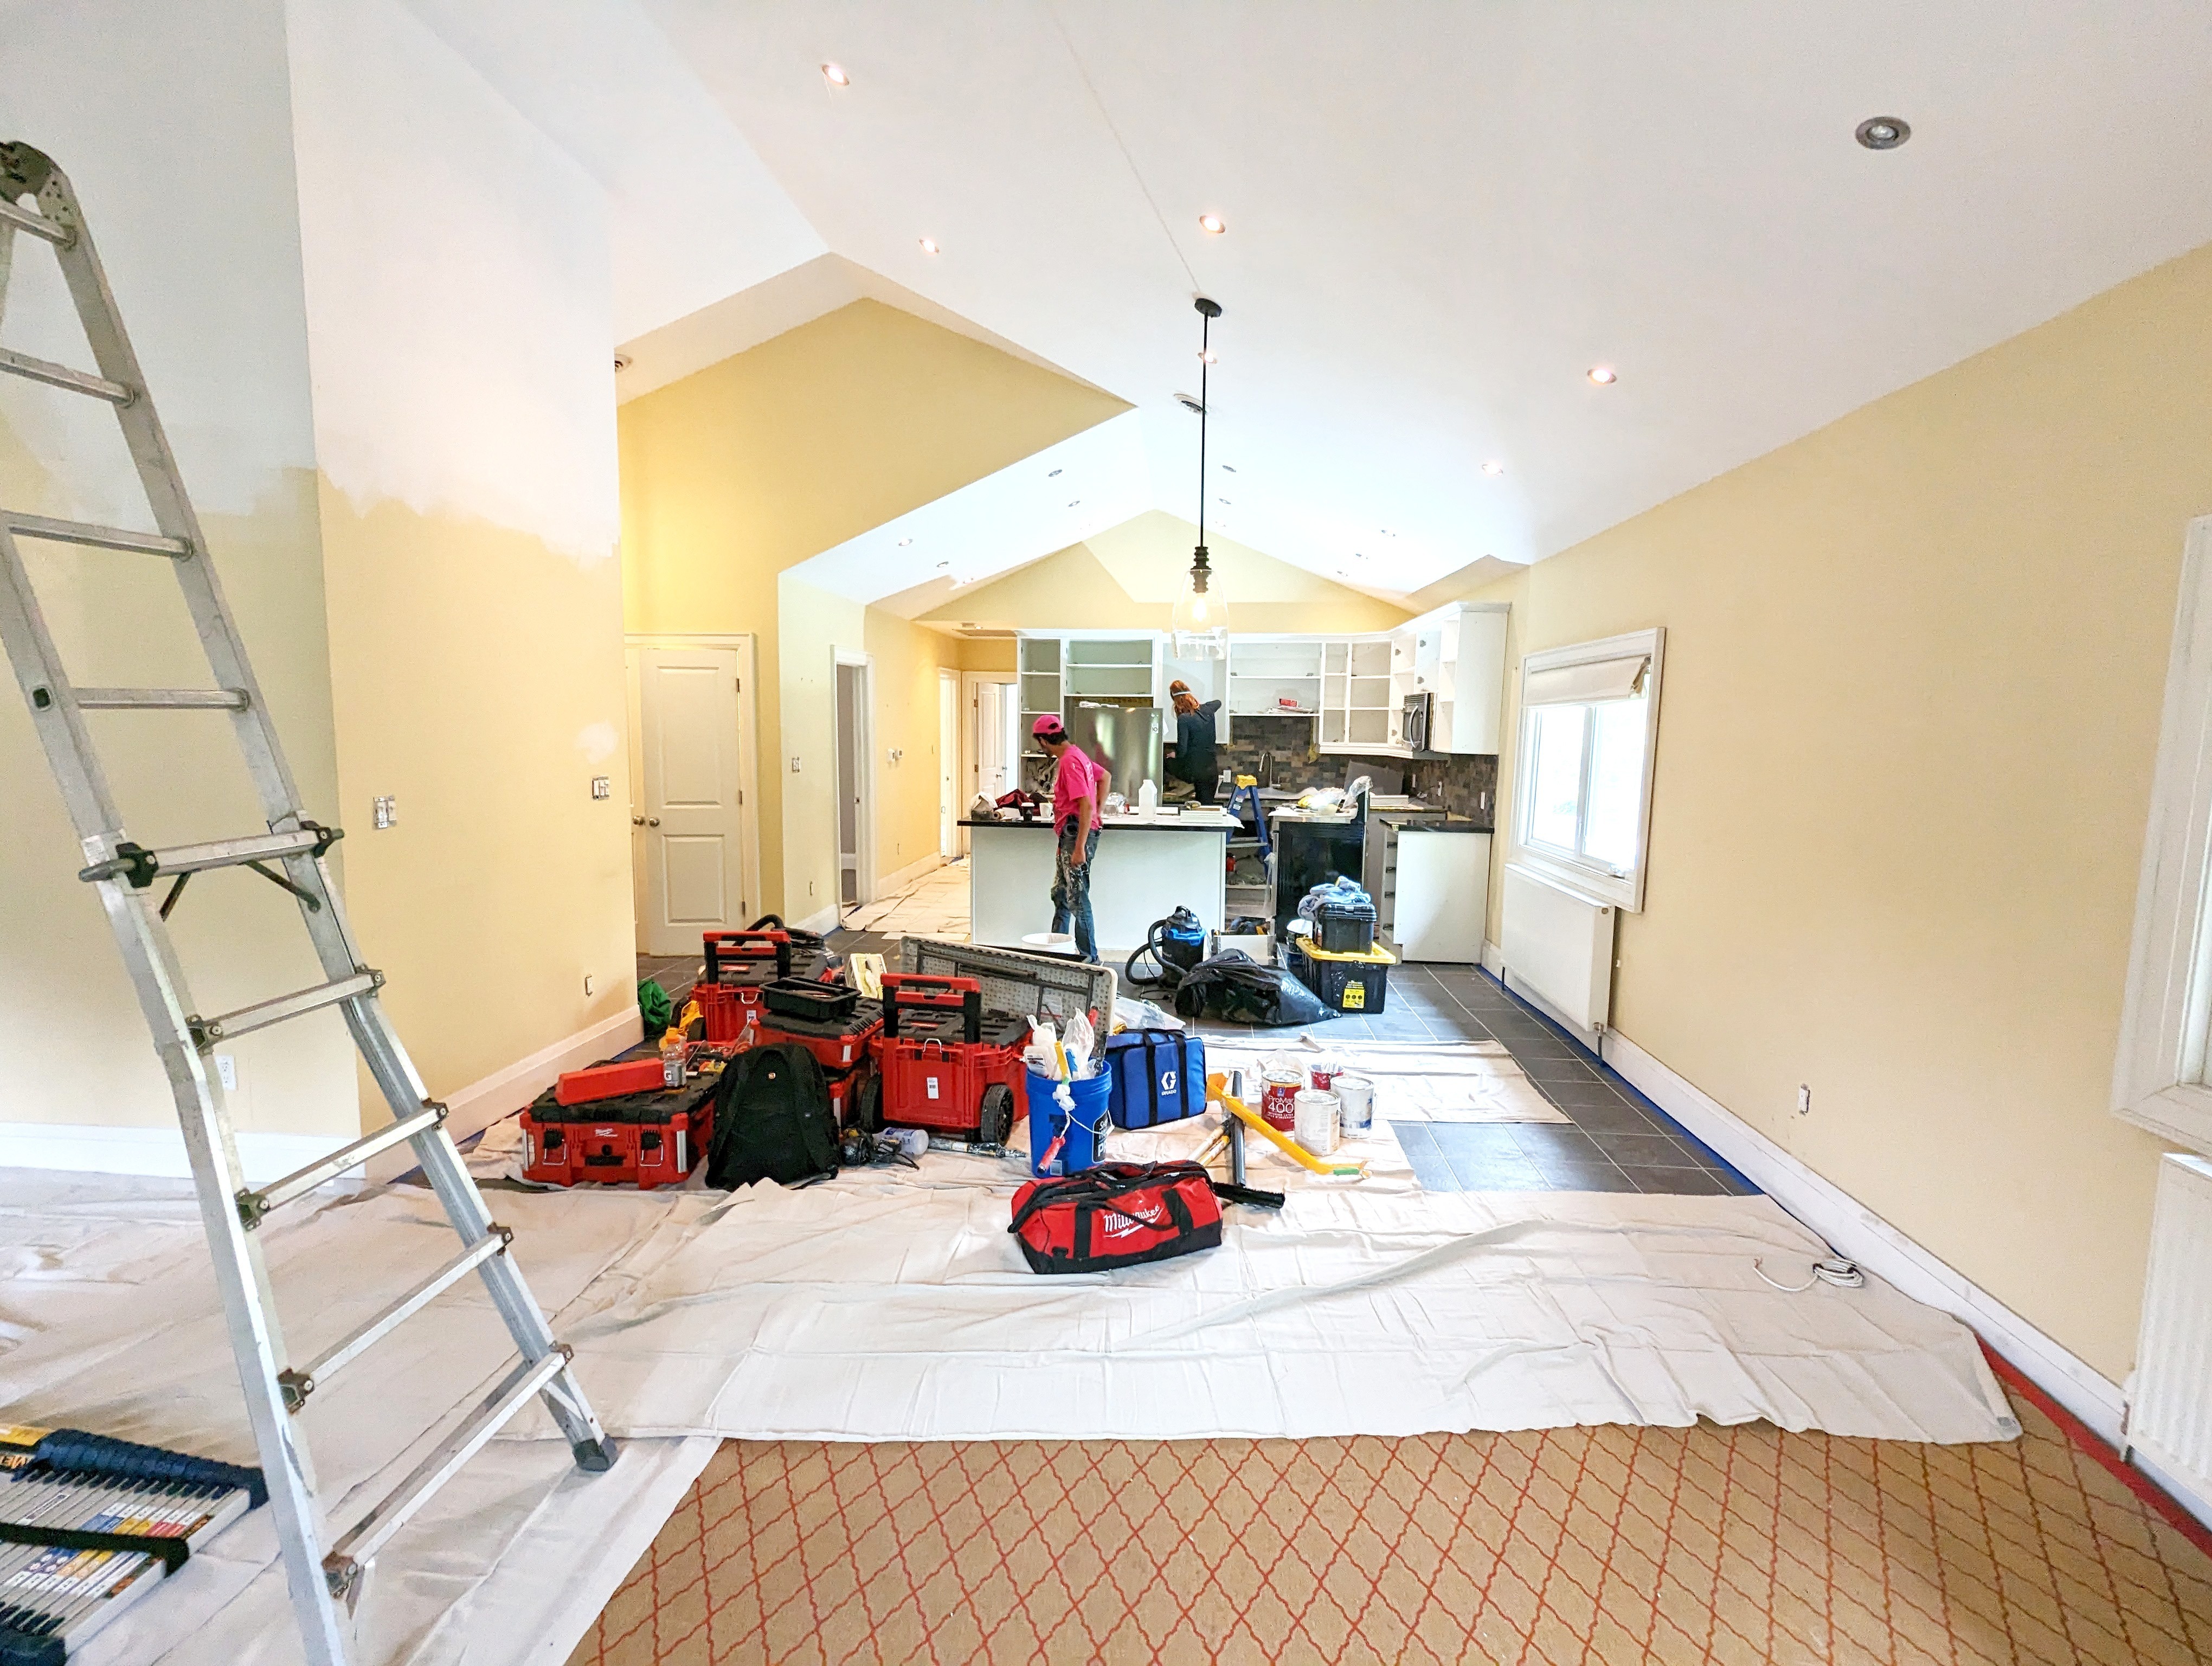 Painting Contractors and House Painter’s tips on Cost-Effective Painting